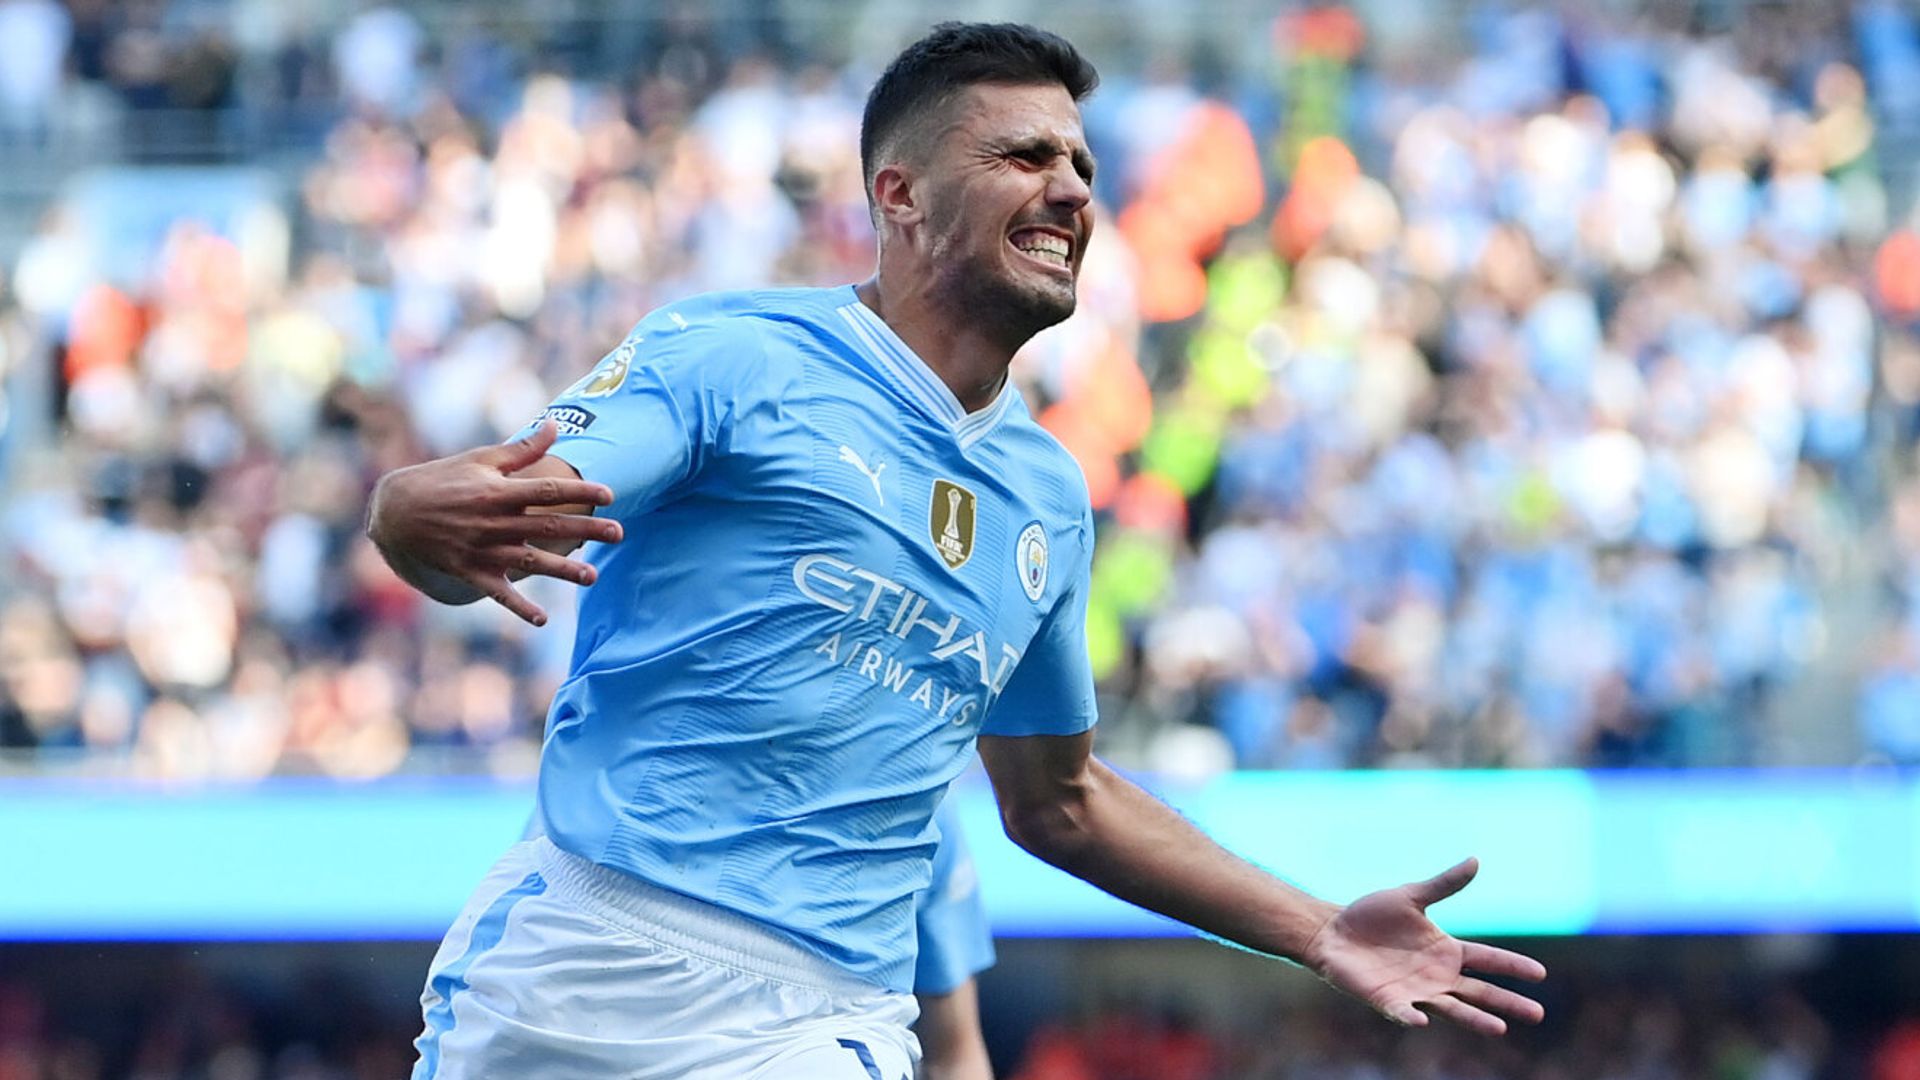 Man City win to claim fourth consecutive Premier League title